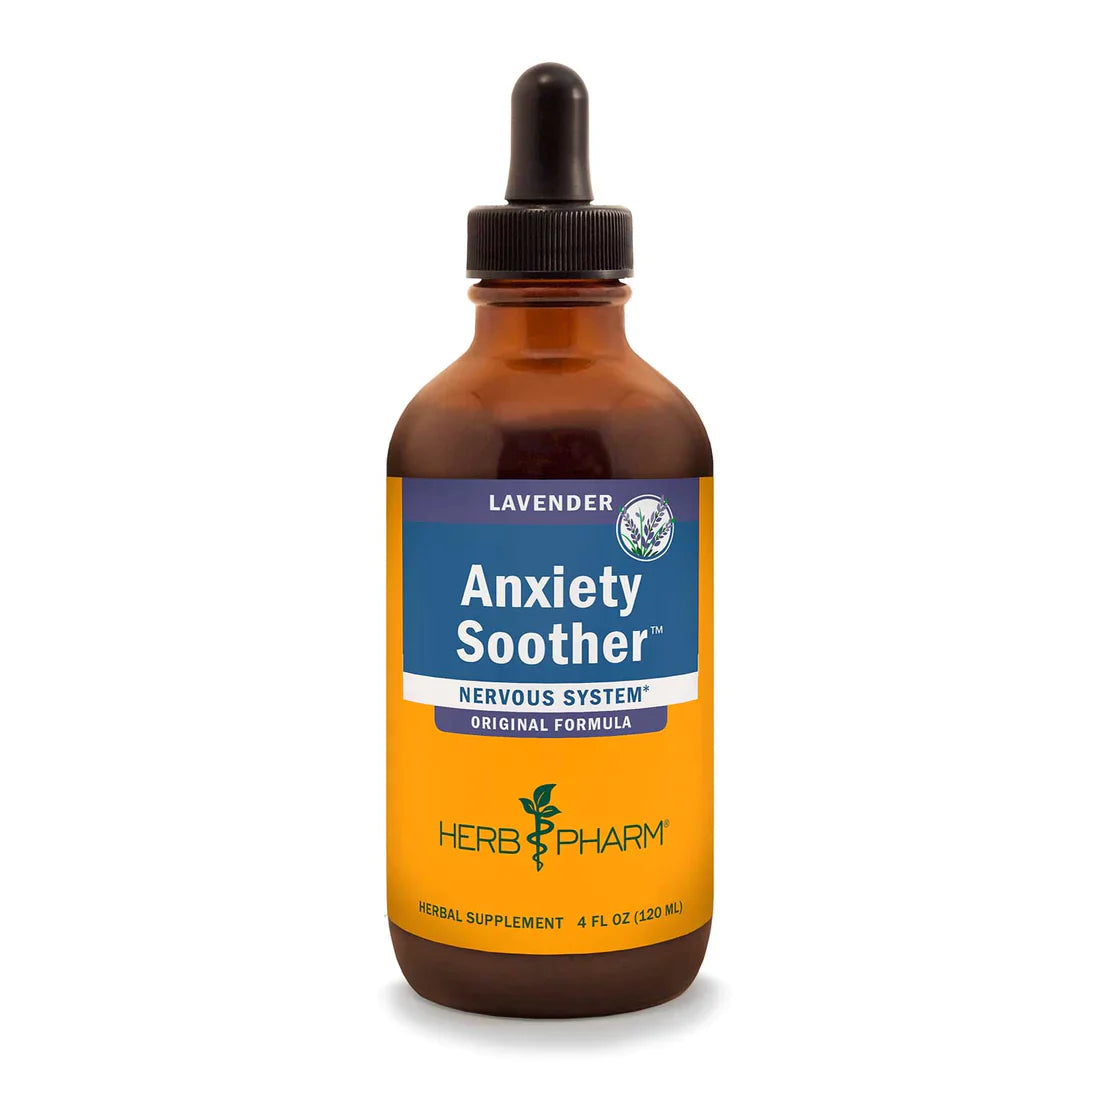 Herb Pharm Anxiety Soother Lavender 4oz